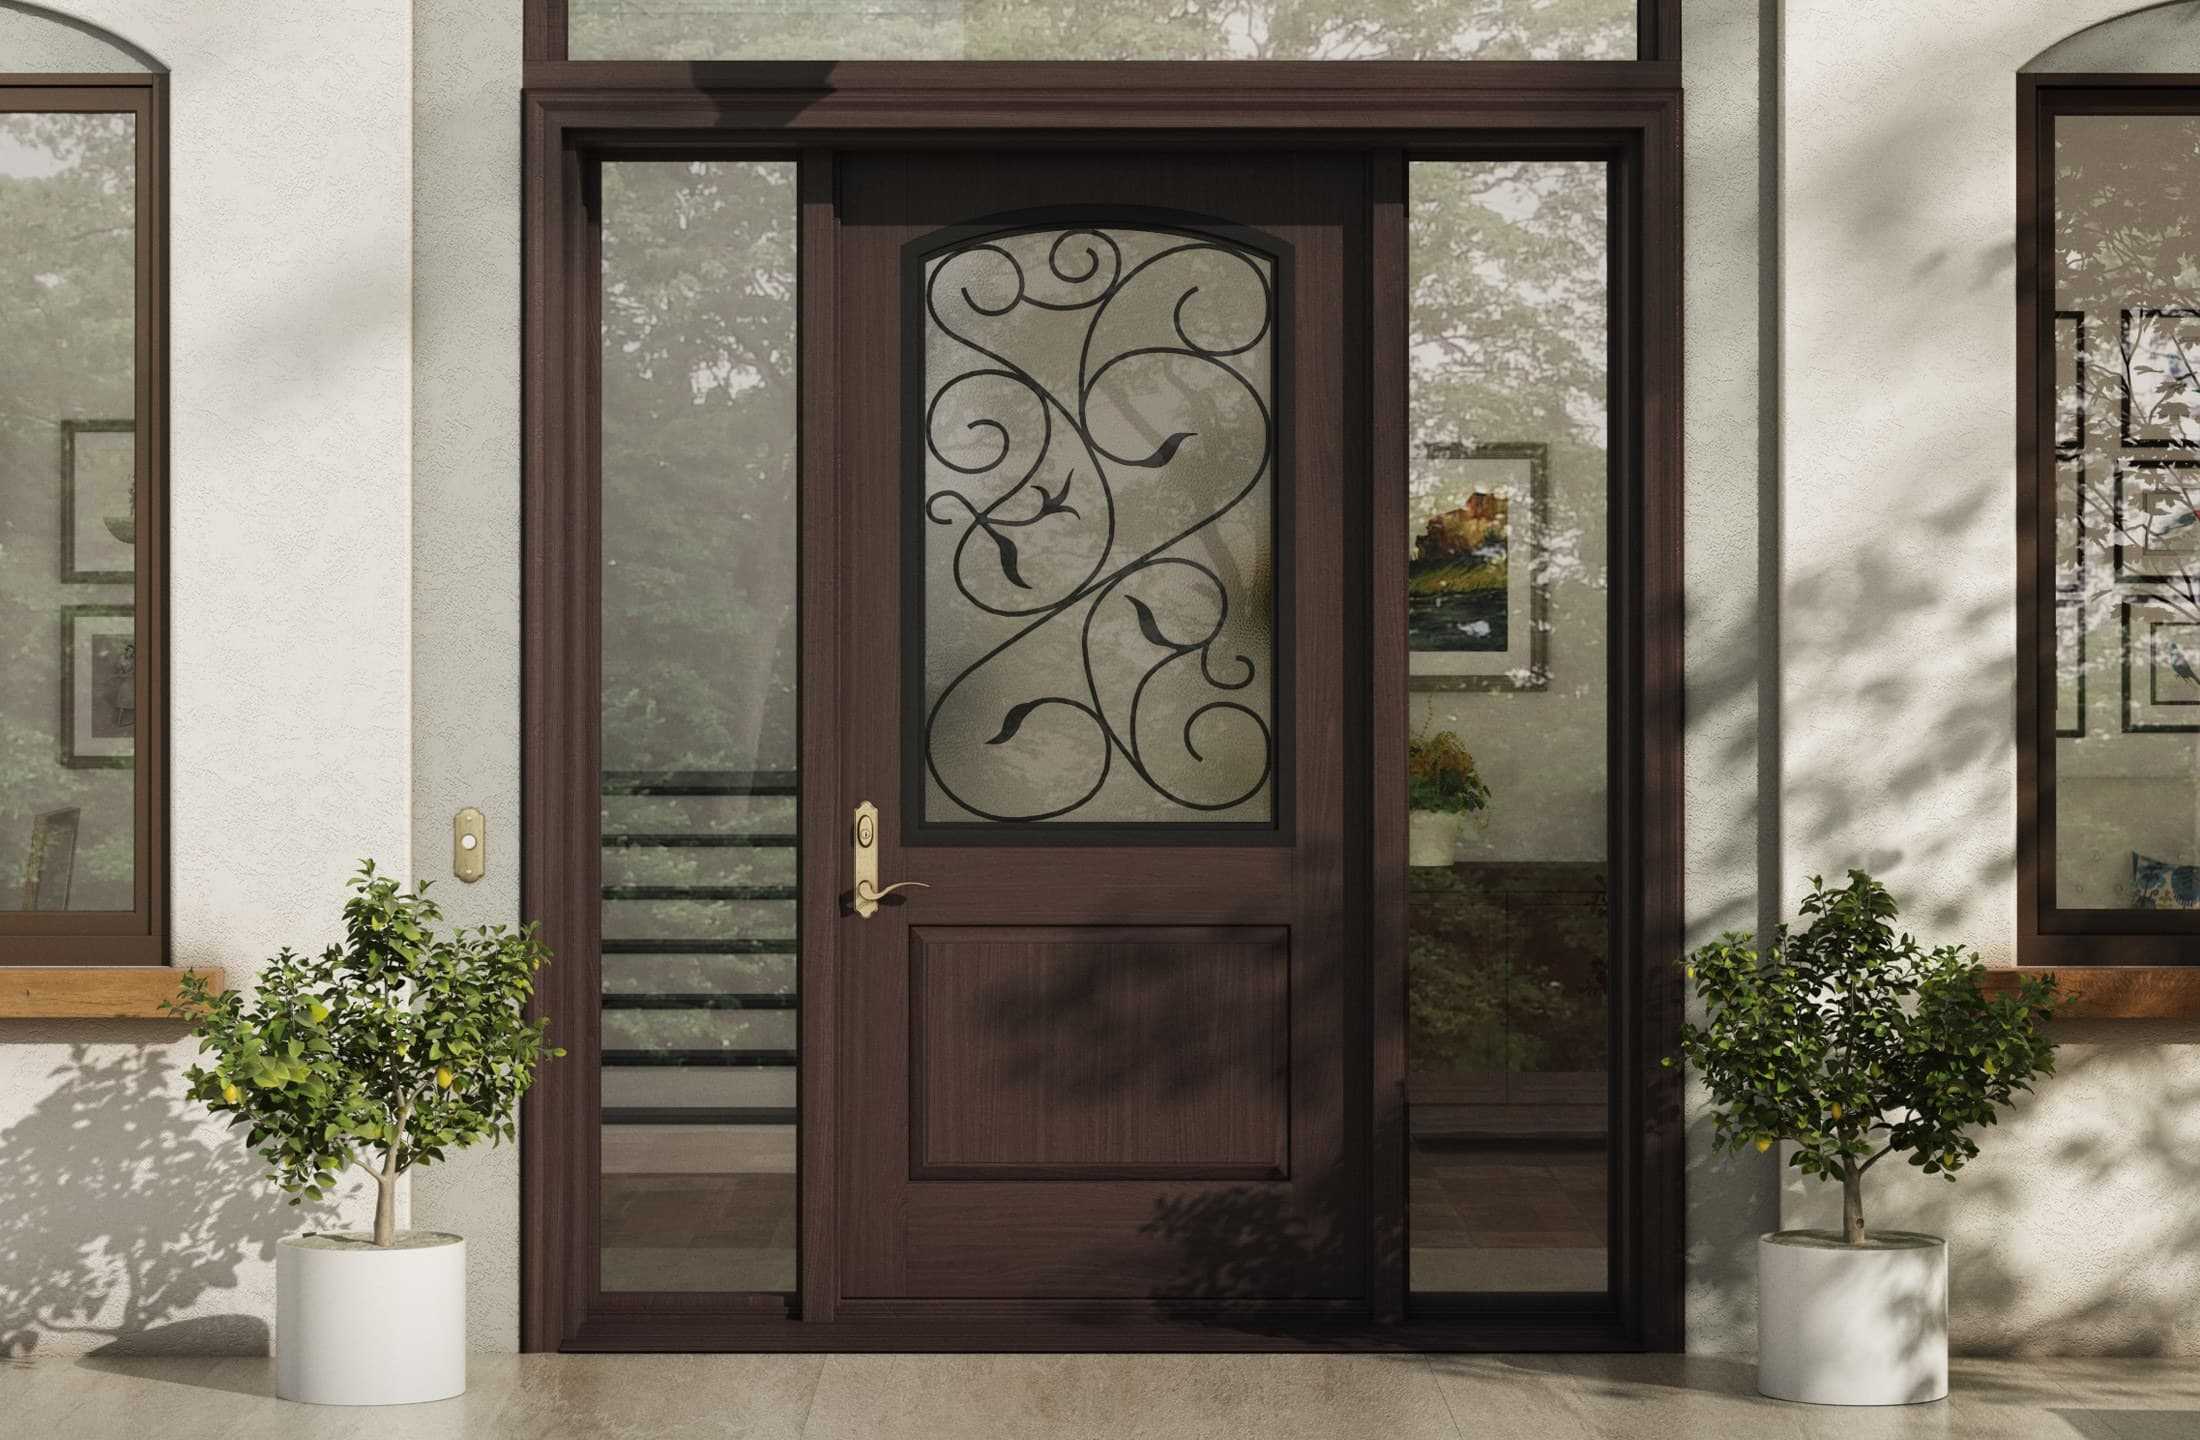 Exterior Wood Double Door for Front Entry or Back Patio